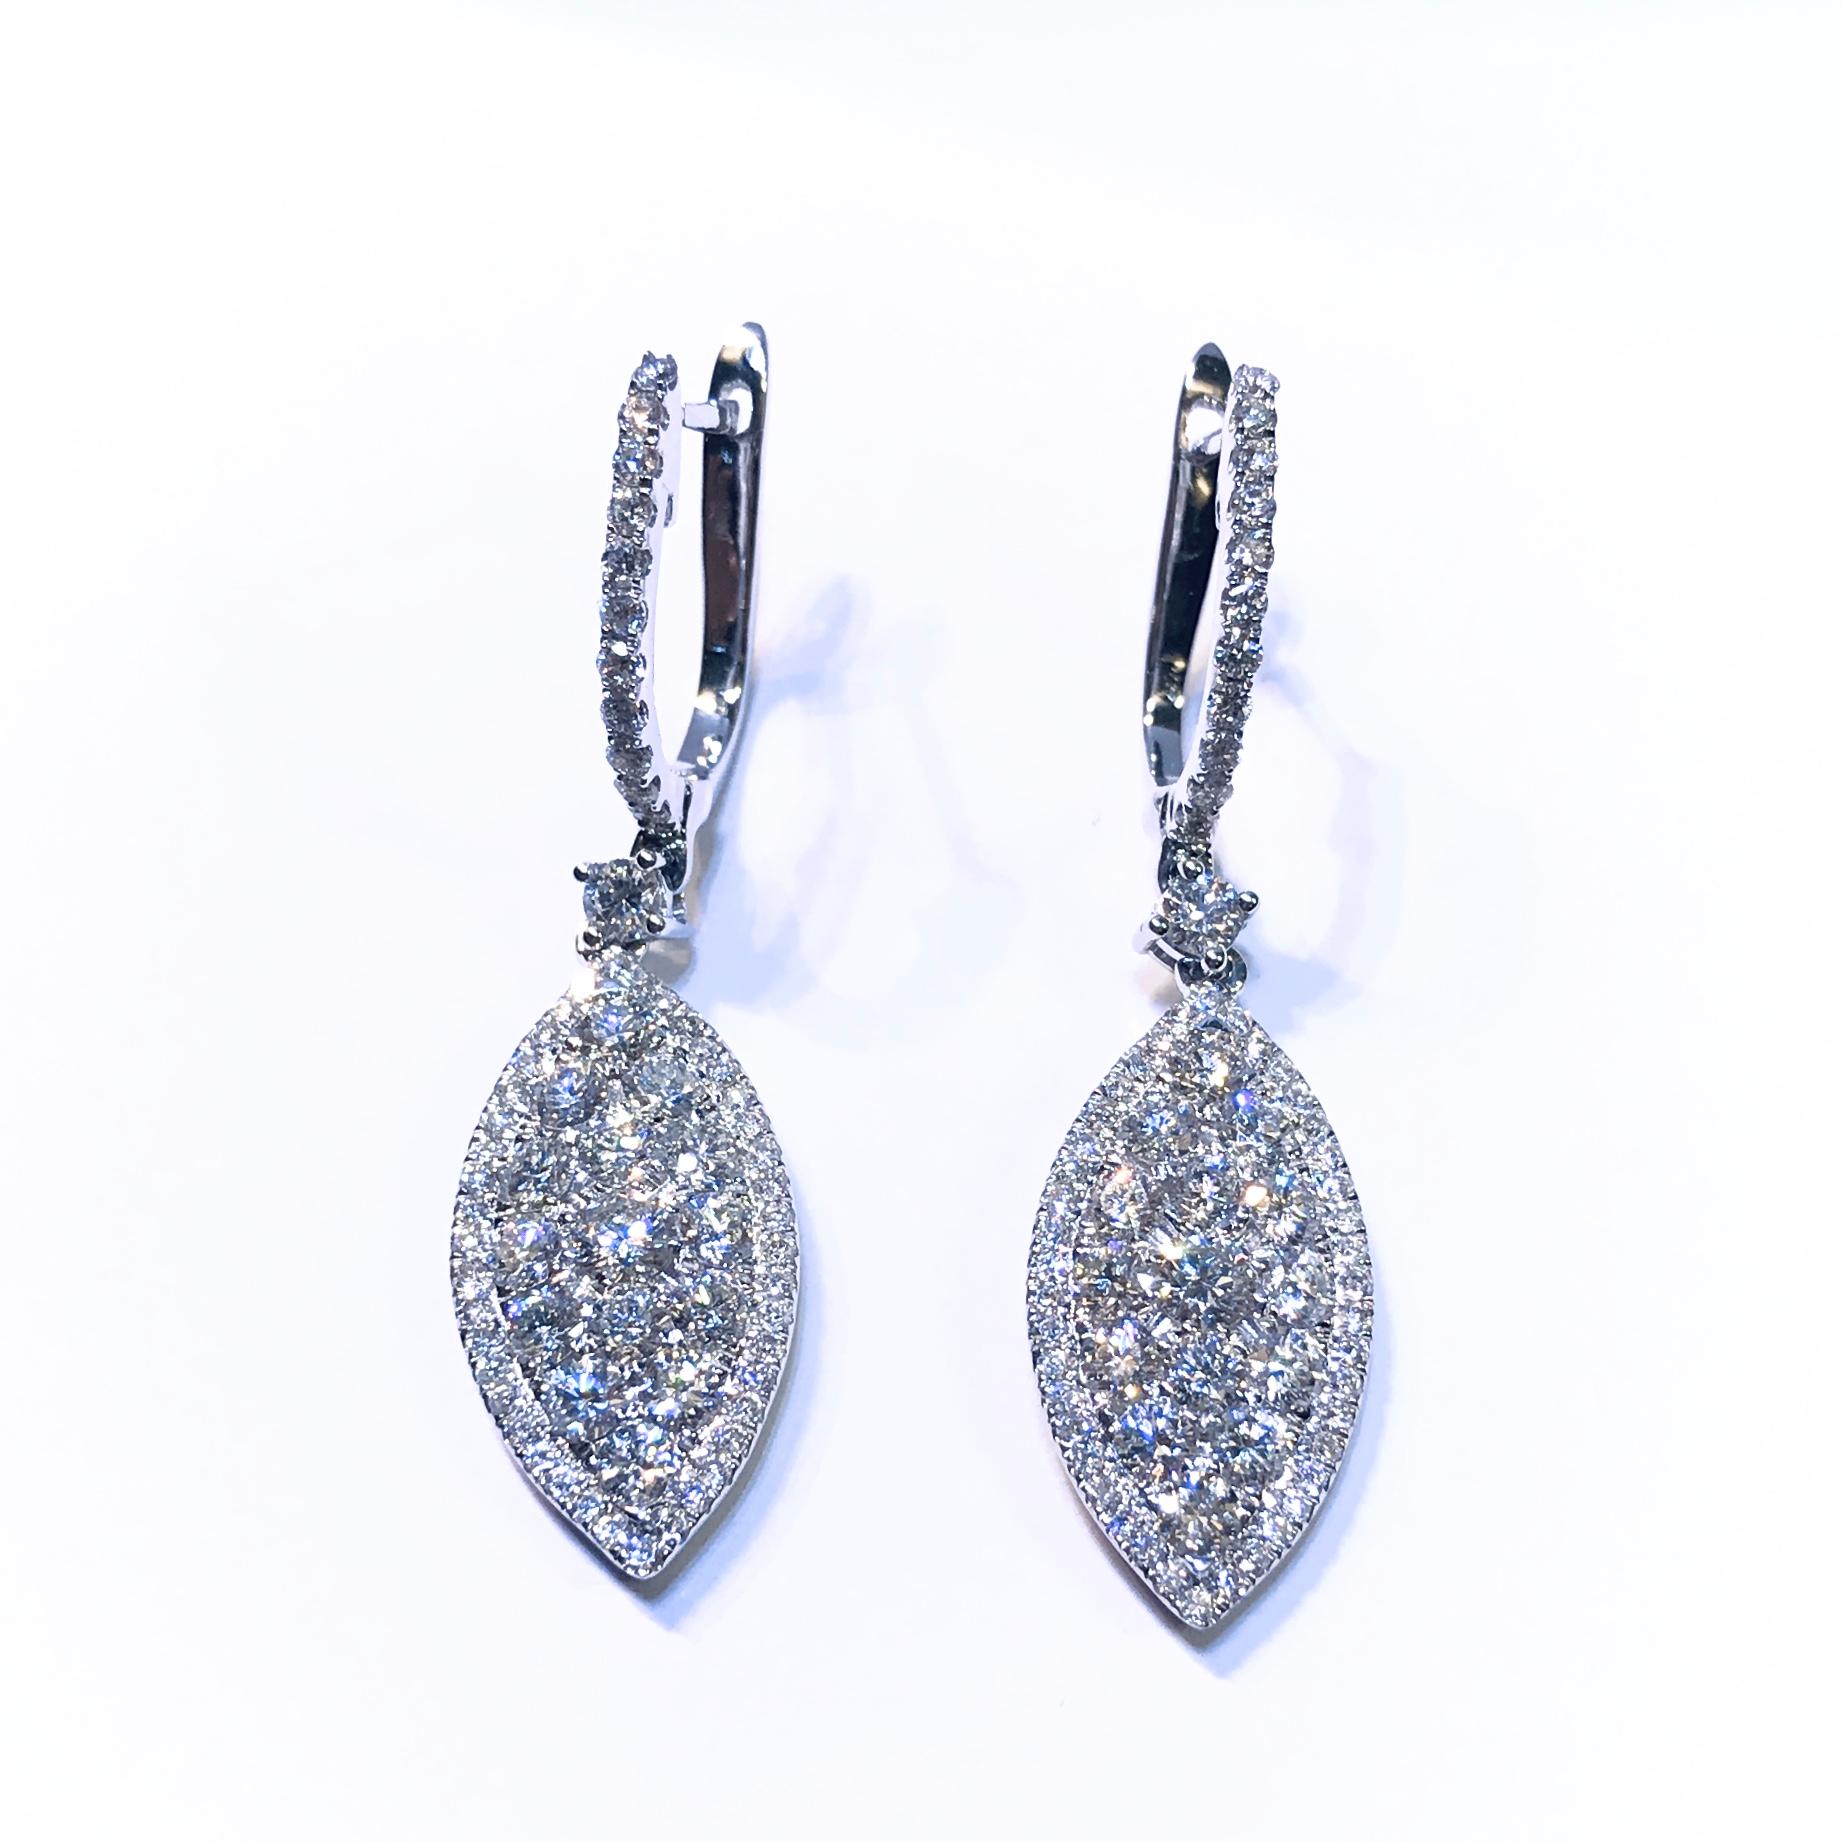 GILIN 18K white gold marquise look diamond drop earrings, simple and elegant style can make your outlook to be perfect. This earring set with round pave setting diamonds as a marquise shape, connecting with a little round diamond hook shine and